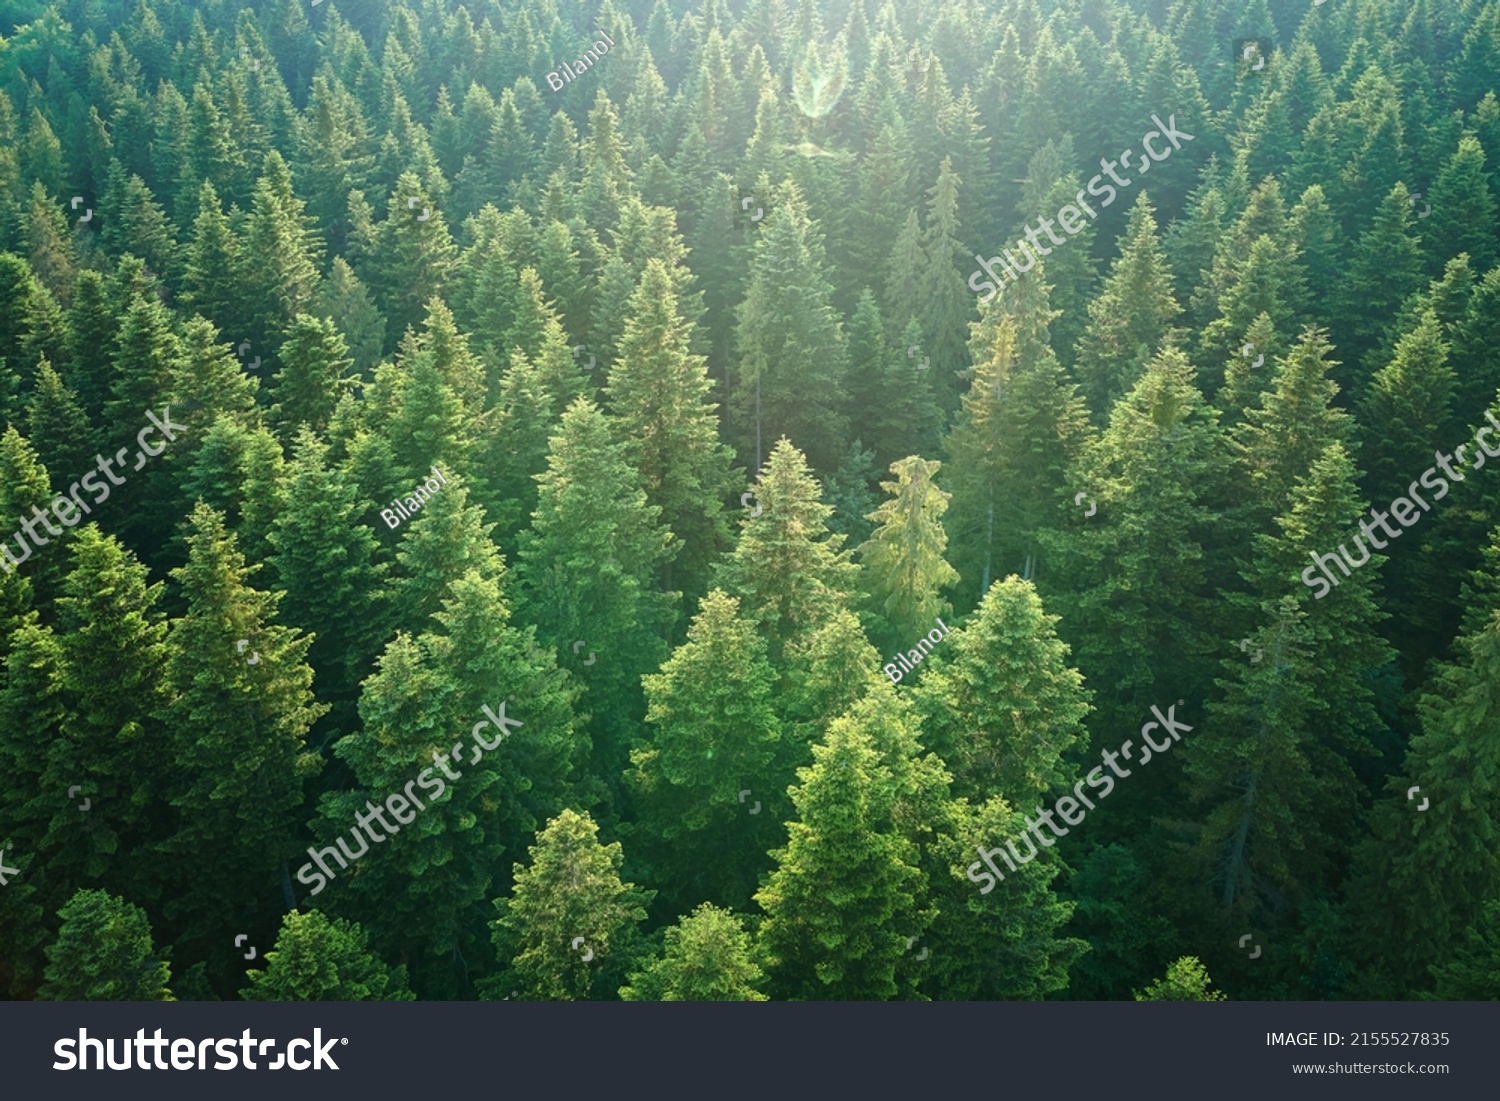 Aerial view of green pine forest with dark spruce trees. Nothern woodland scenery from above #2155527835